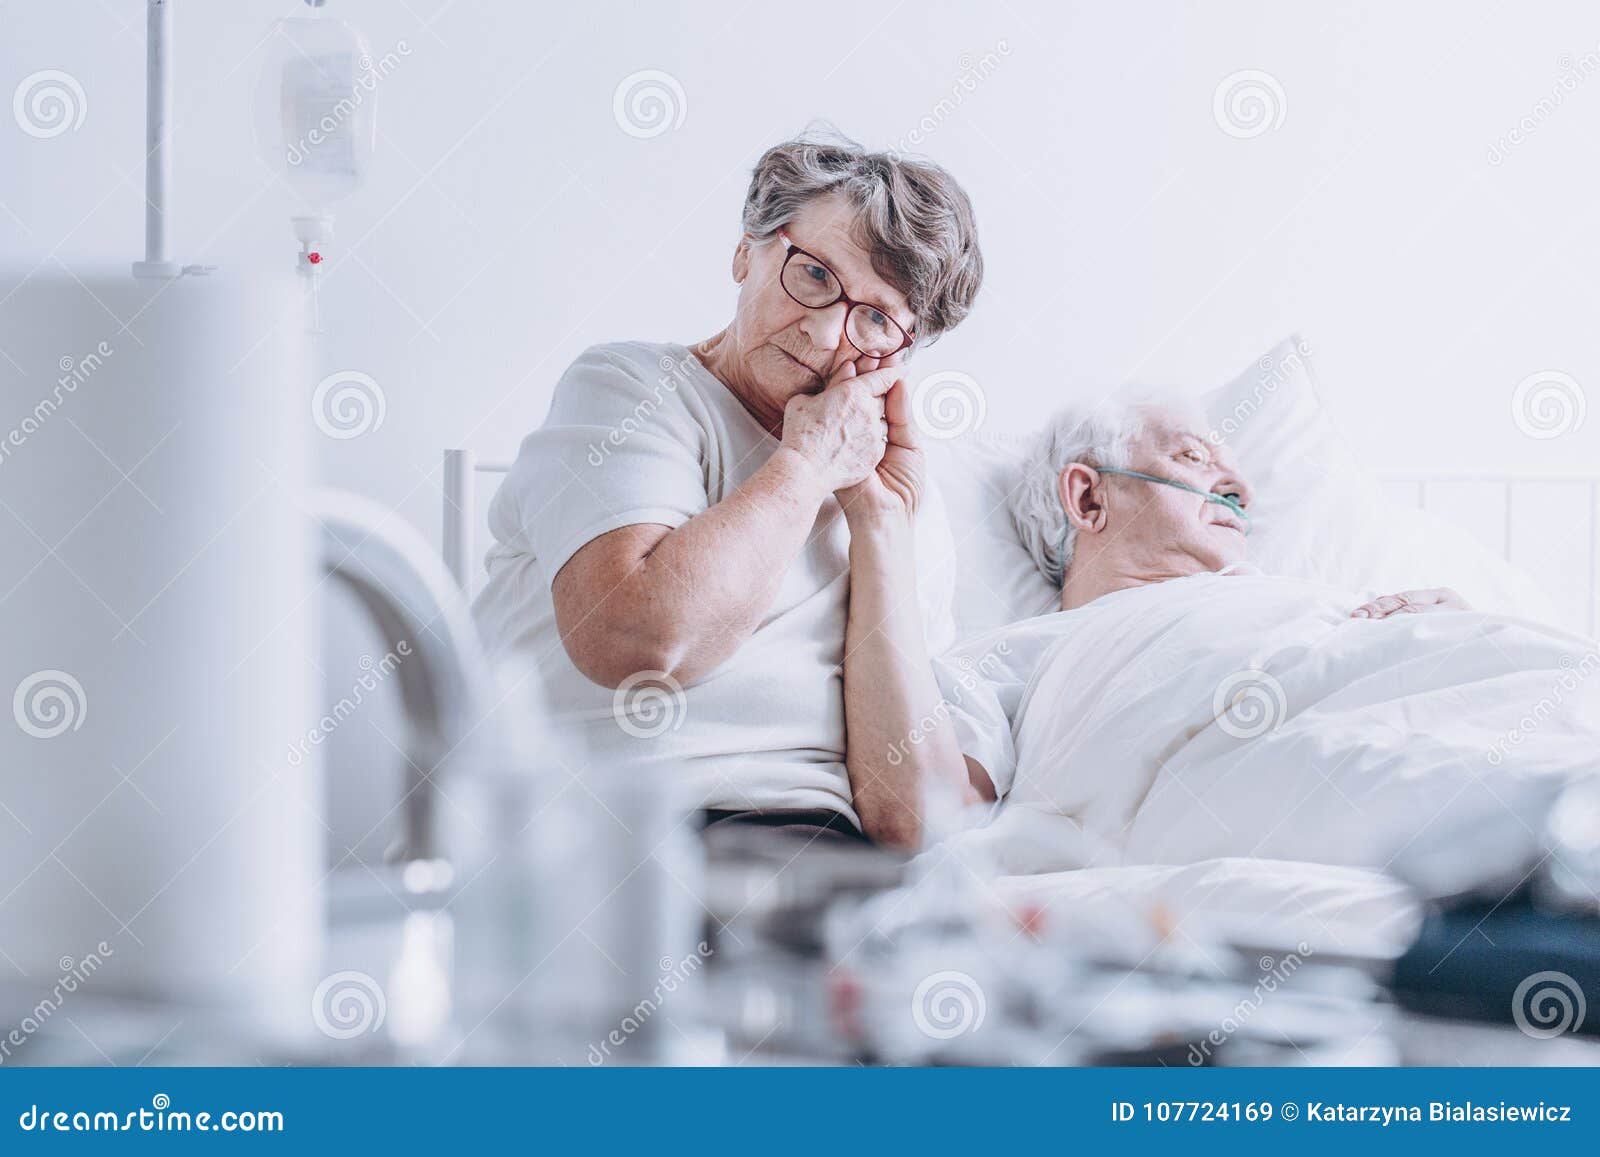 Loving Wife at Hospital Bed Stock Image